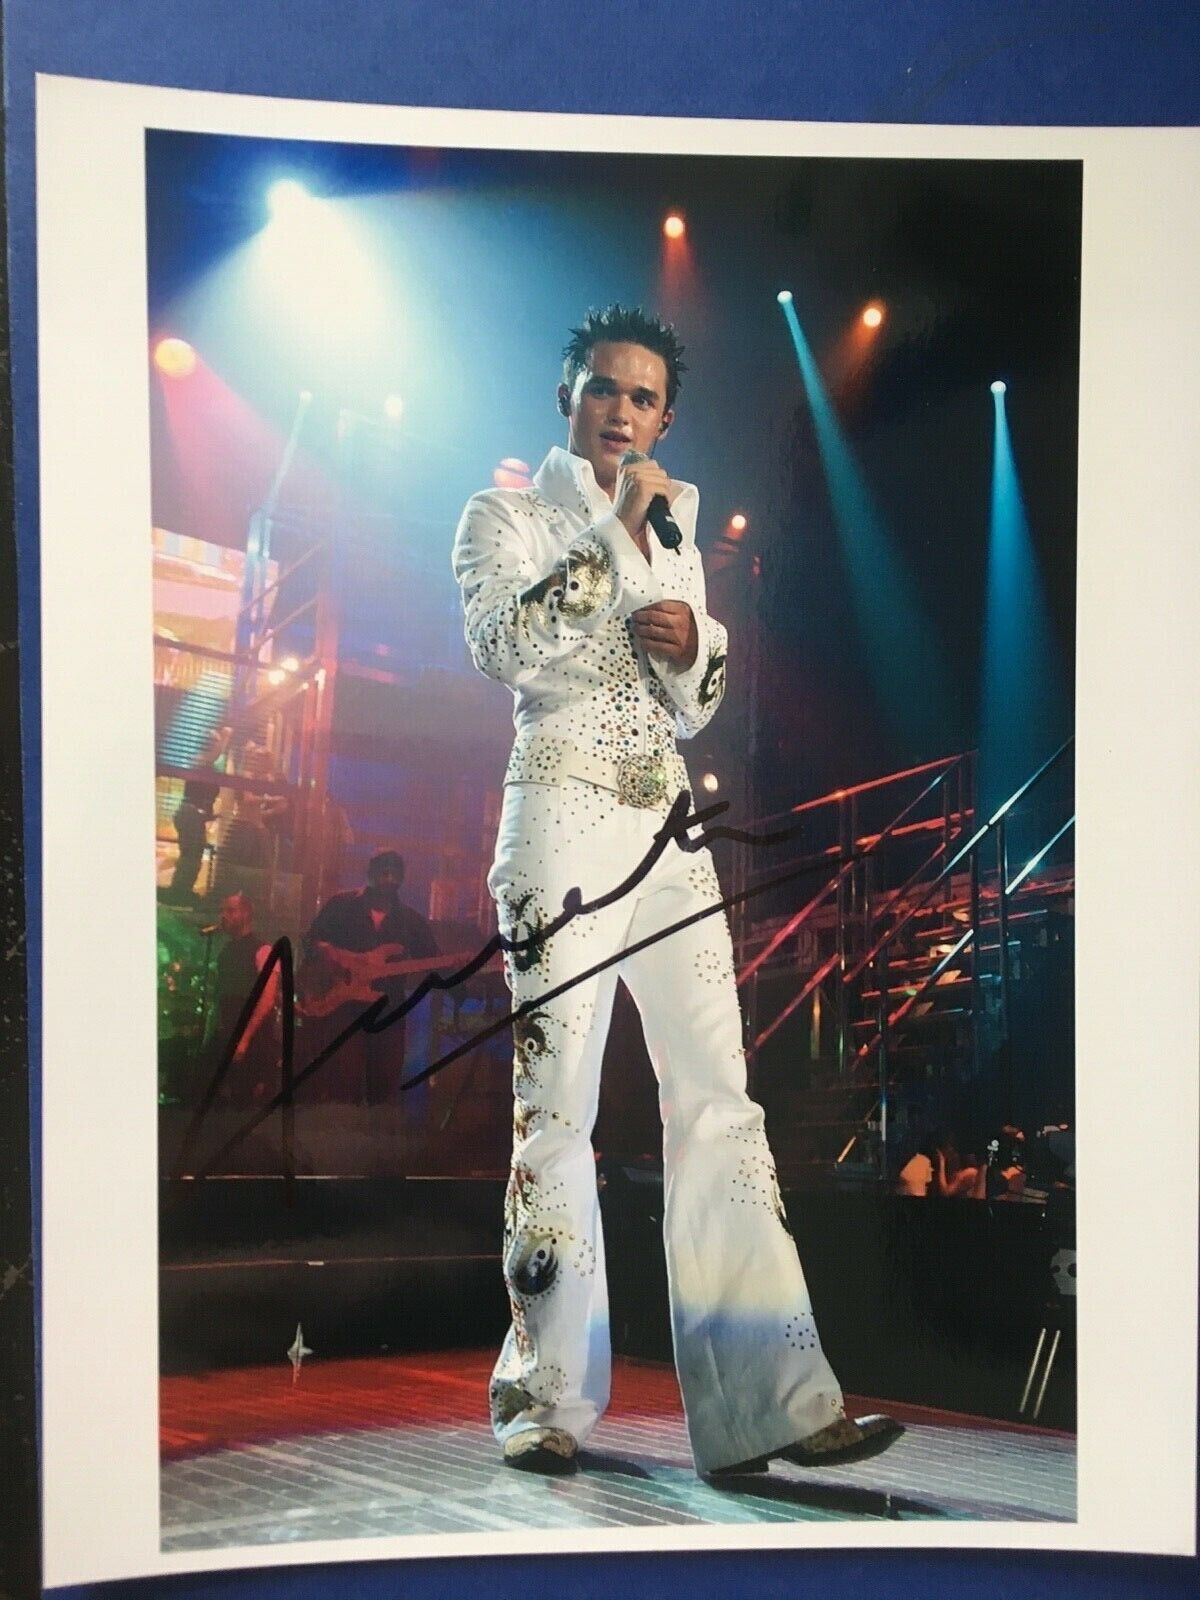 GARETH GATES - CHART TOPPING SINGER - EXCELLENT SIGNED IN CONCERT Photo Poster painting